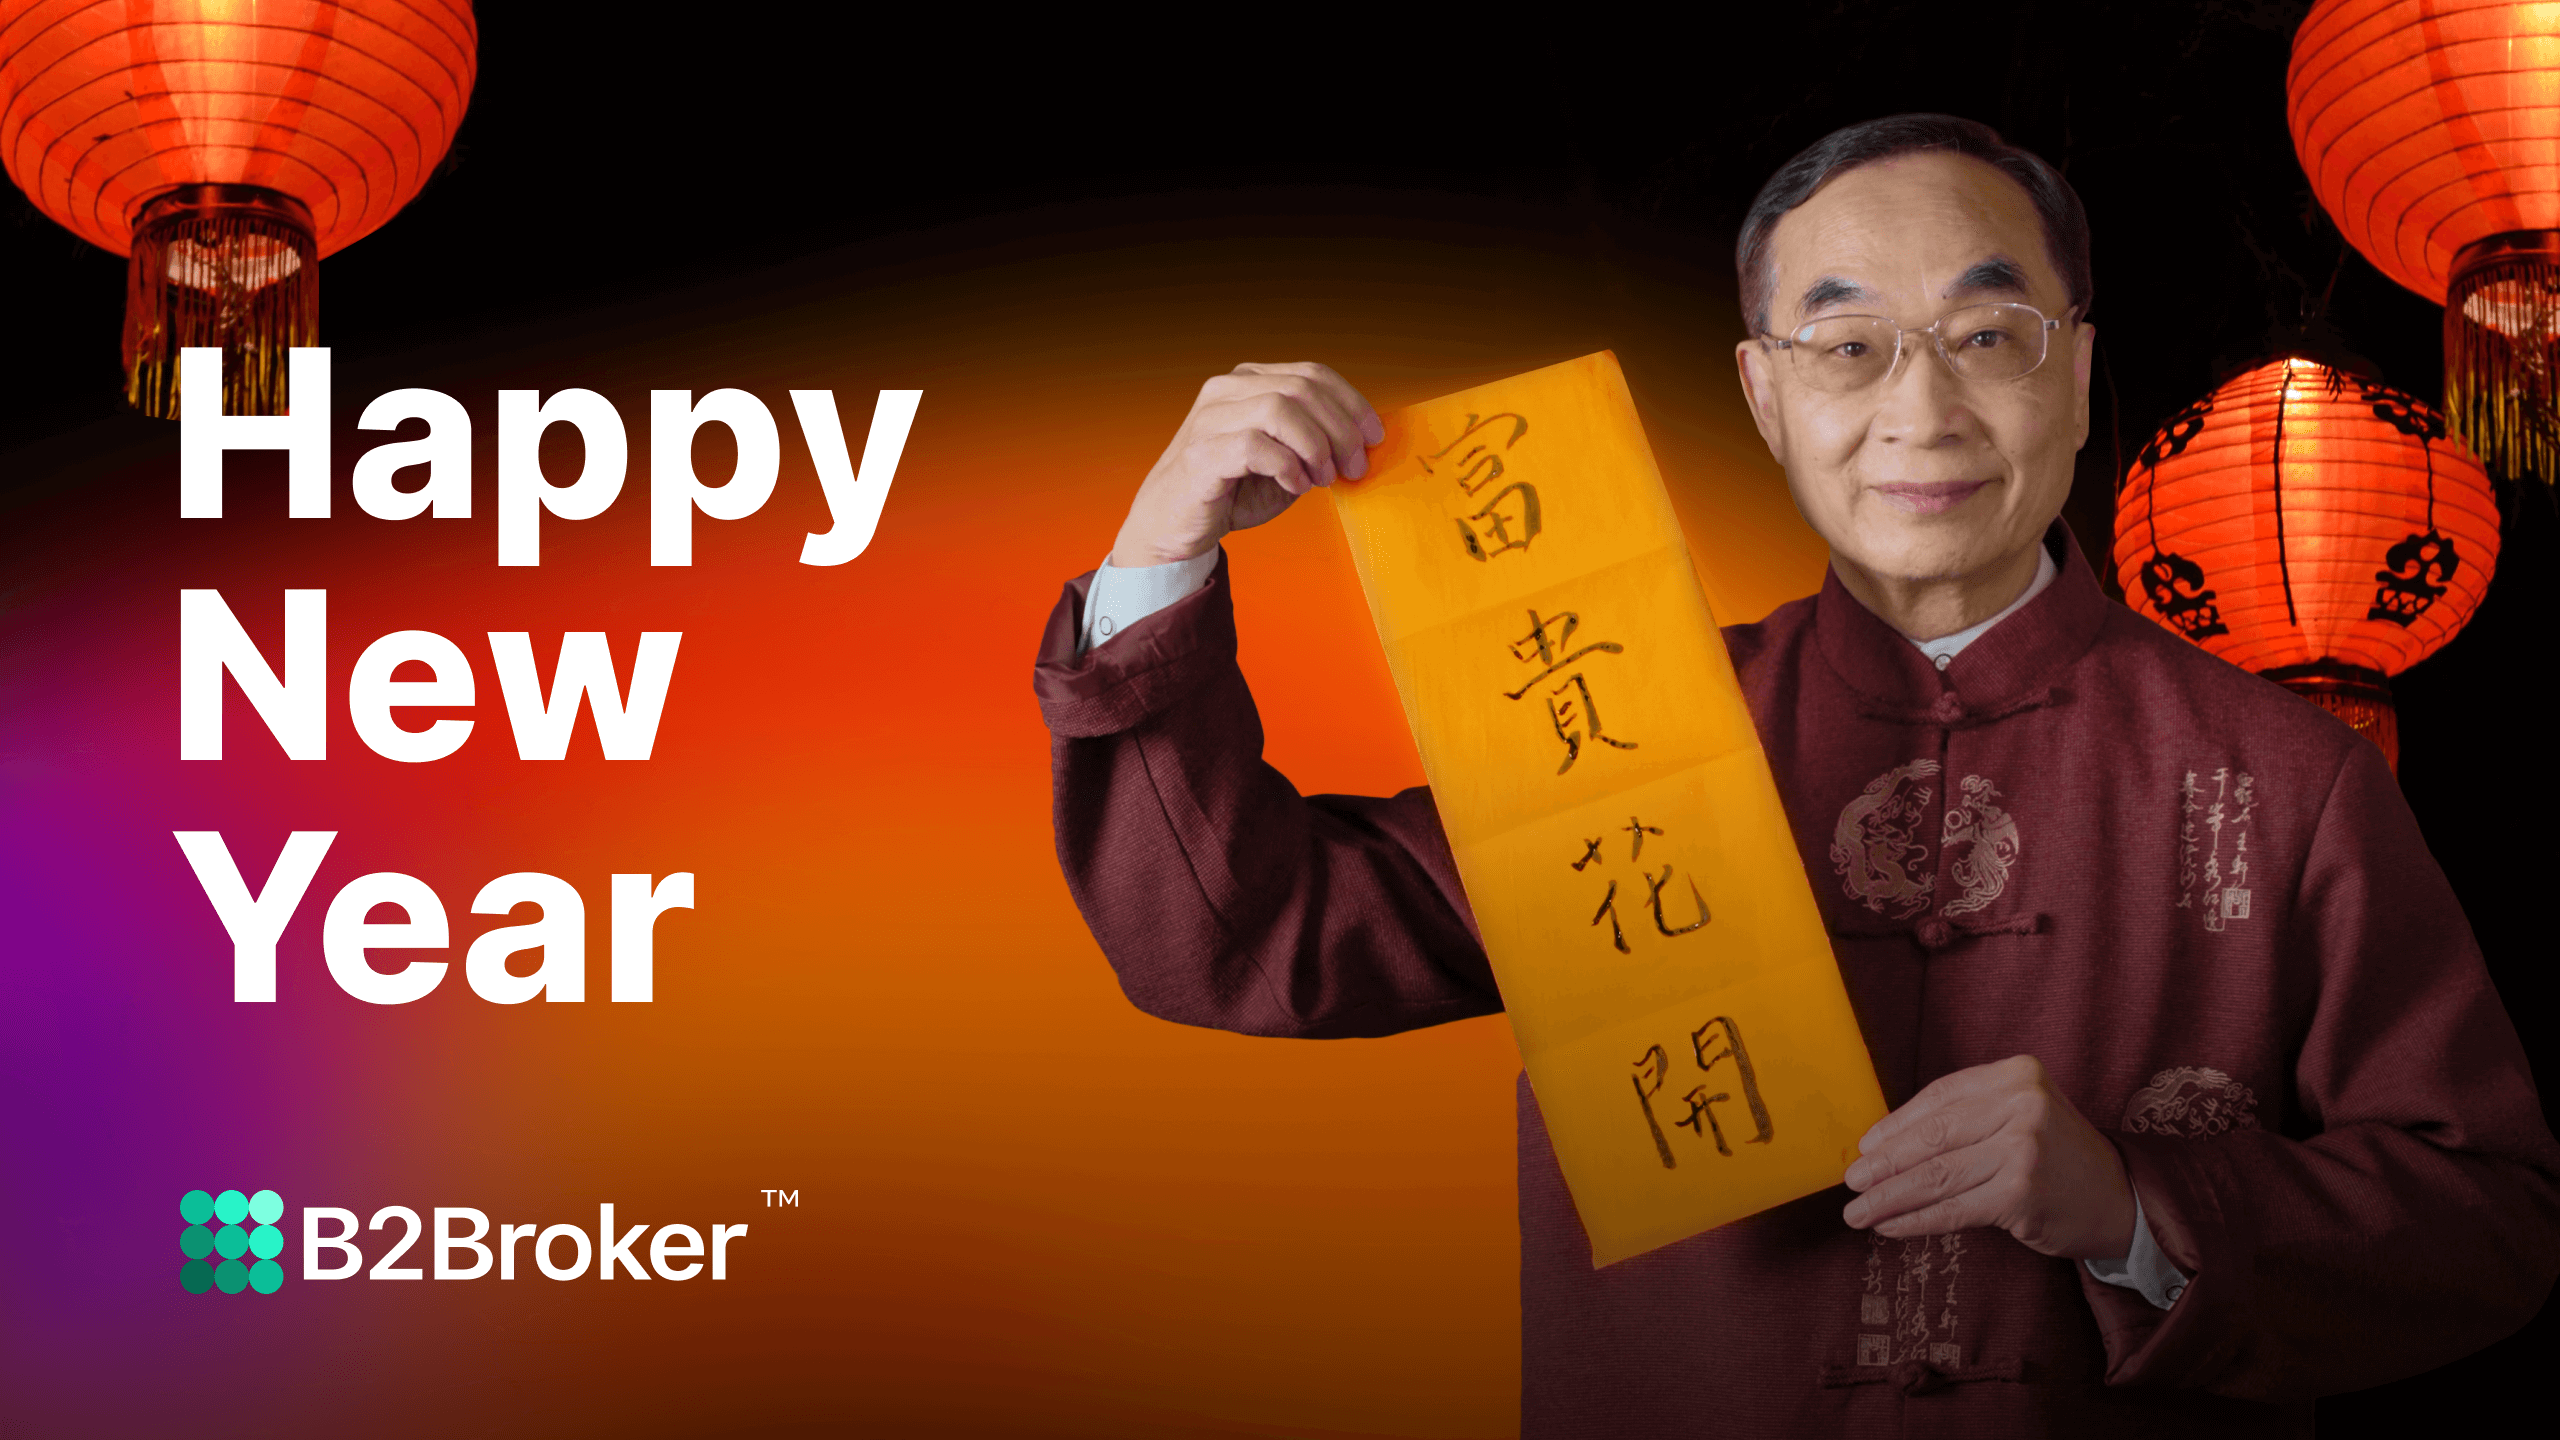 2023 Lunar New Year Wishes from B2Broker